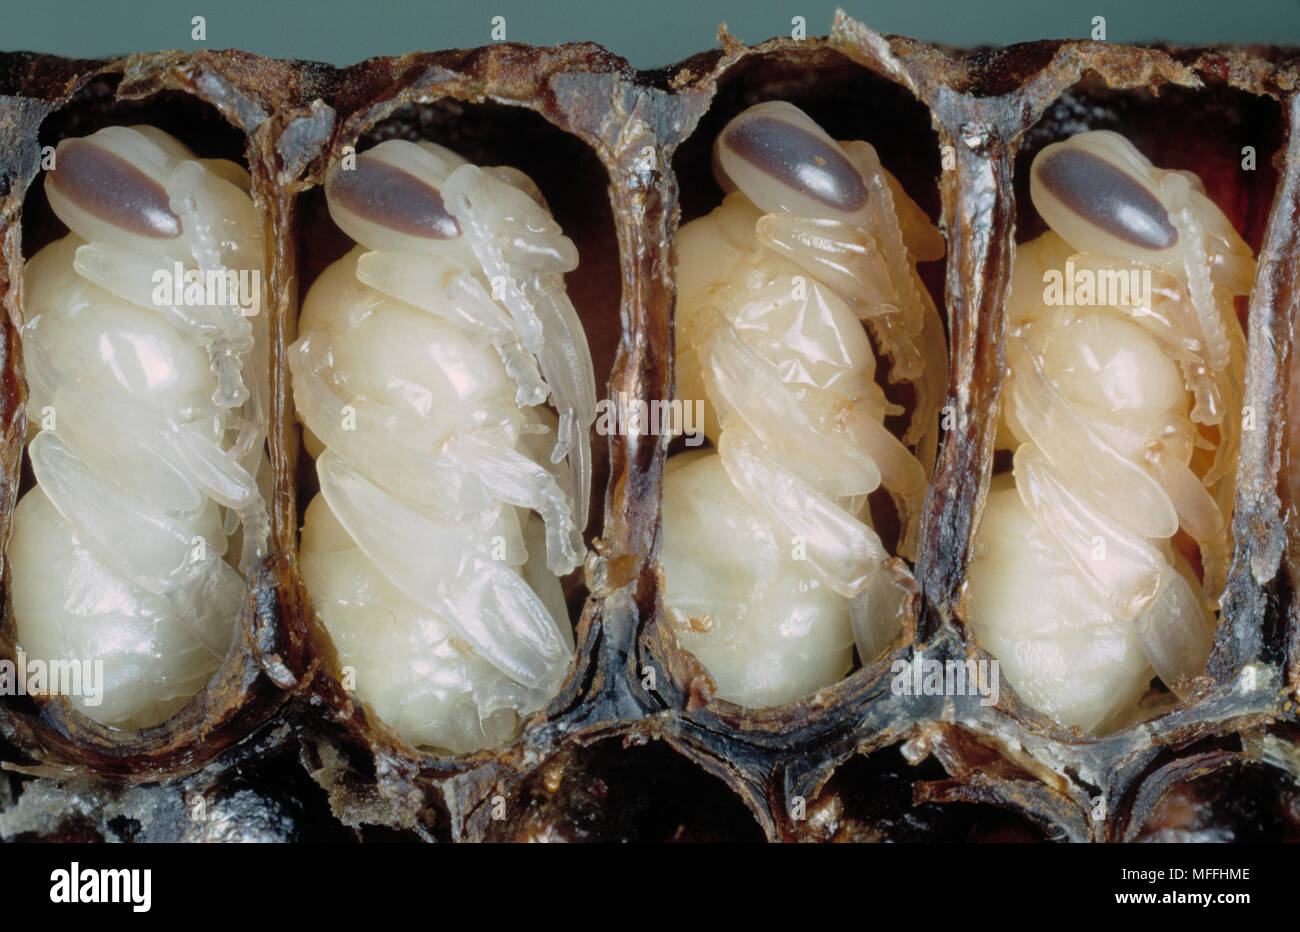 AFRICAN HONEYBEE  pupae  Apis mellifera adansonii shown in sectioned cells   South Africa Stock Photo